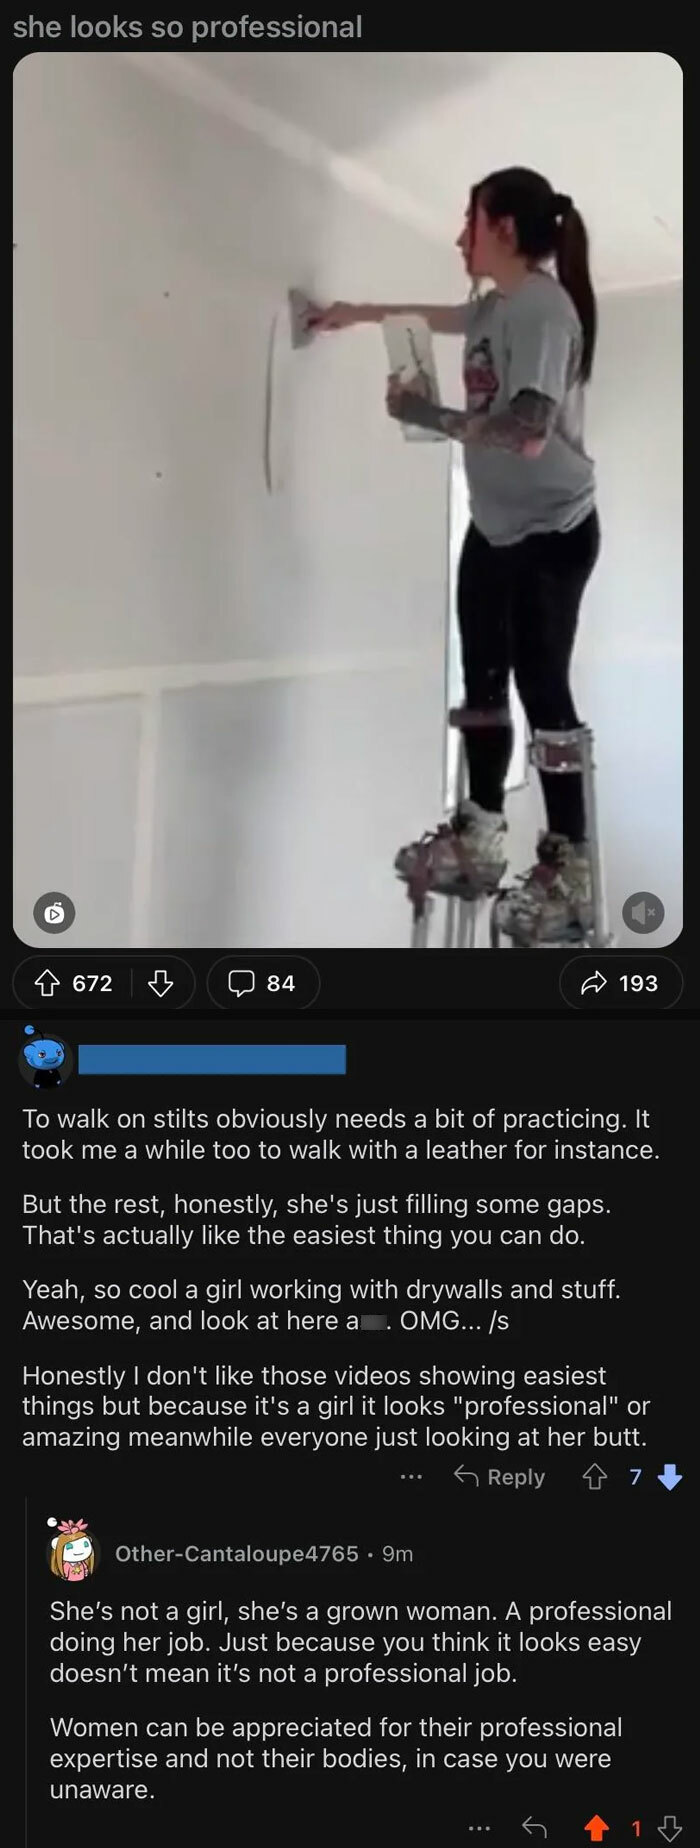 You Can Bet Your A*s That If A Man Were In The Video Instead, Everyone In Those Comments Would Be Talking About What A Clean And Professional Job He Was Doing Smdh